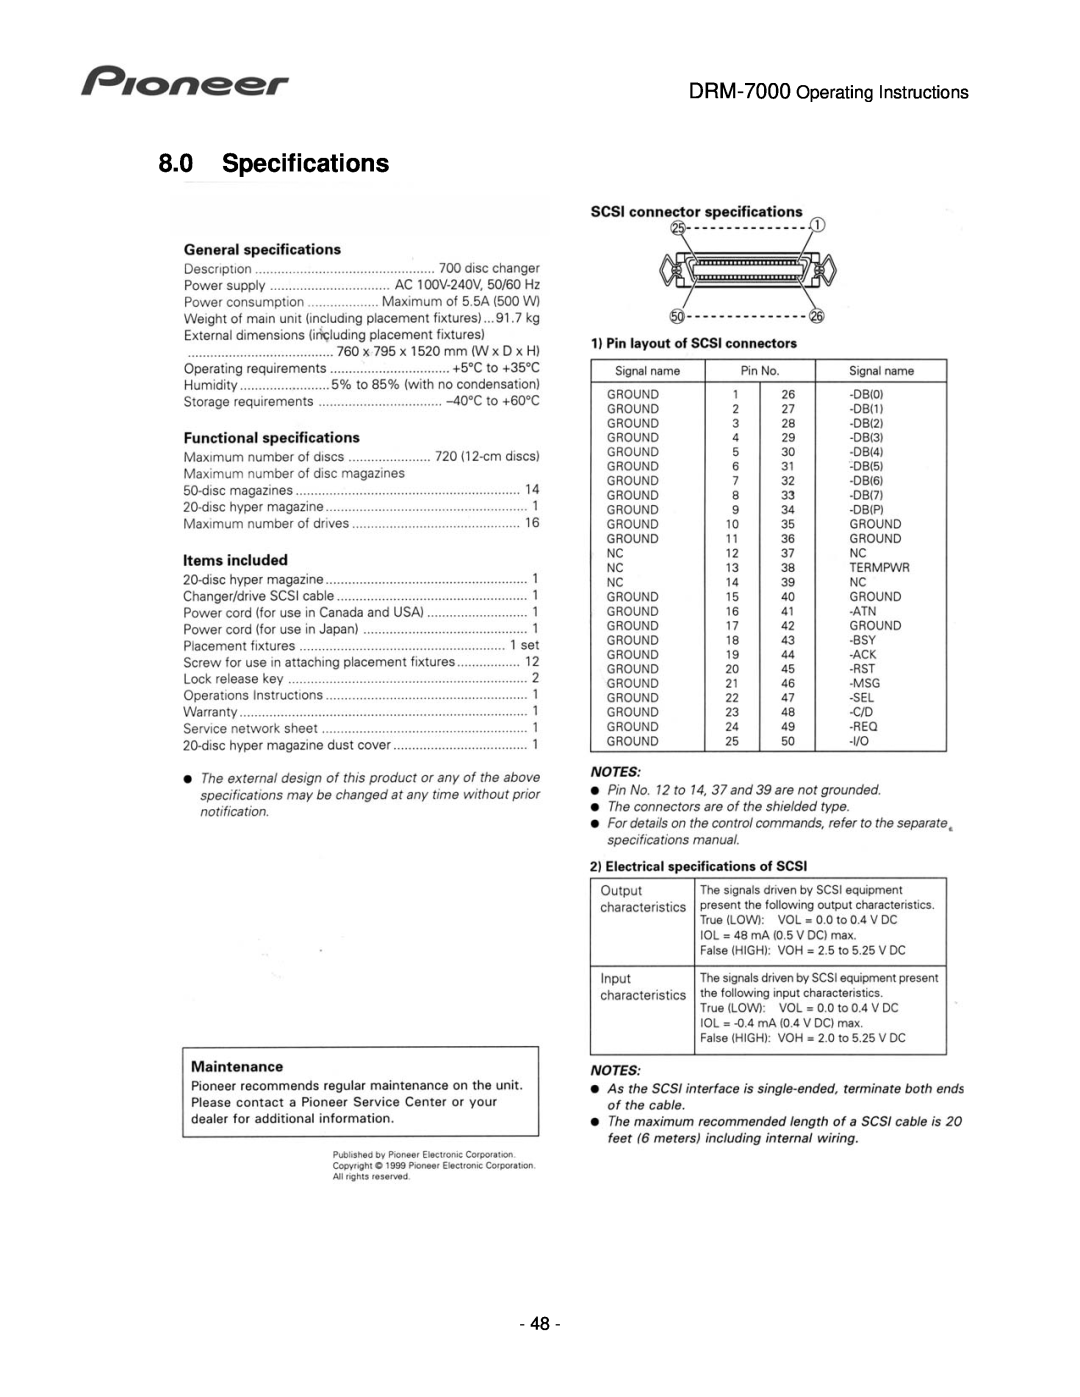 Pioneer operating instructions 8.0Specifications, DRM-7000 Operating Instructions 